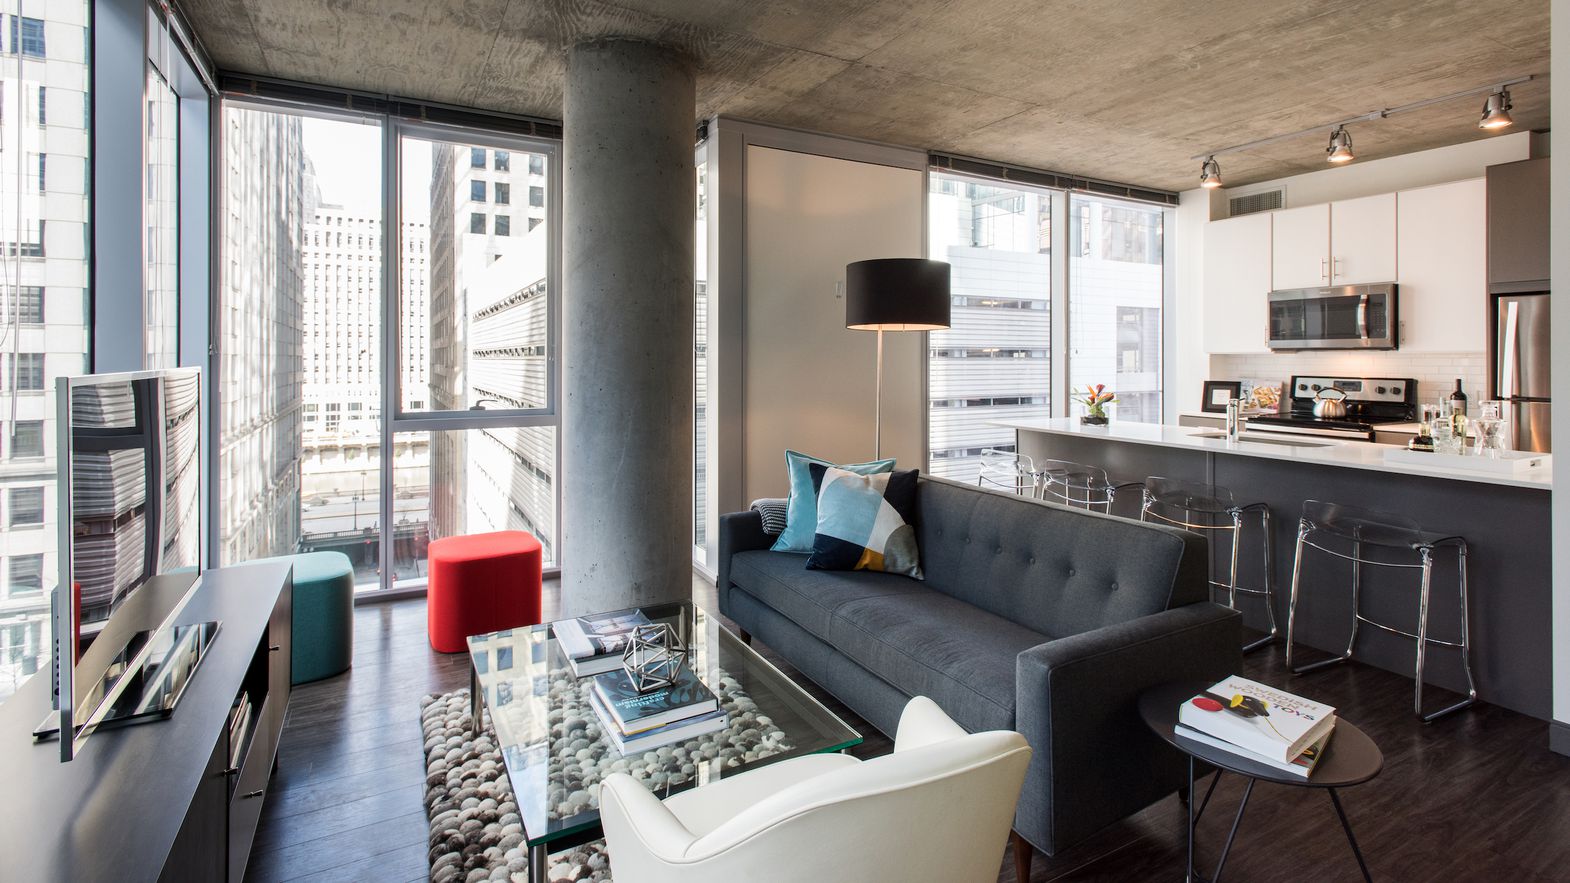 Luxury apartments for rent near the Loop now leasing!